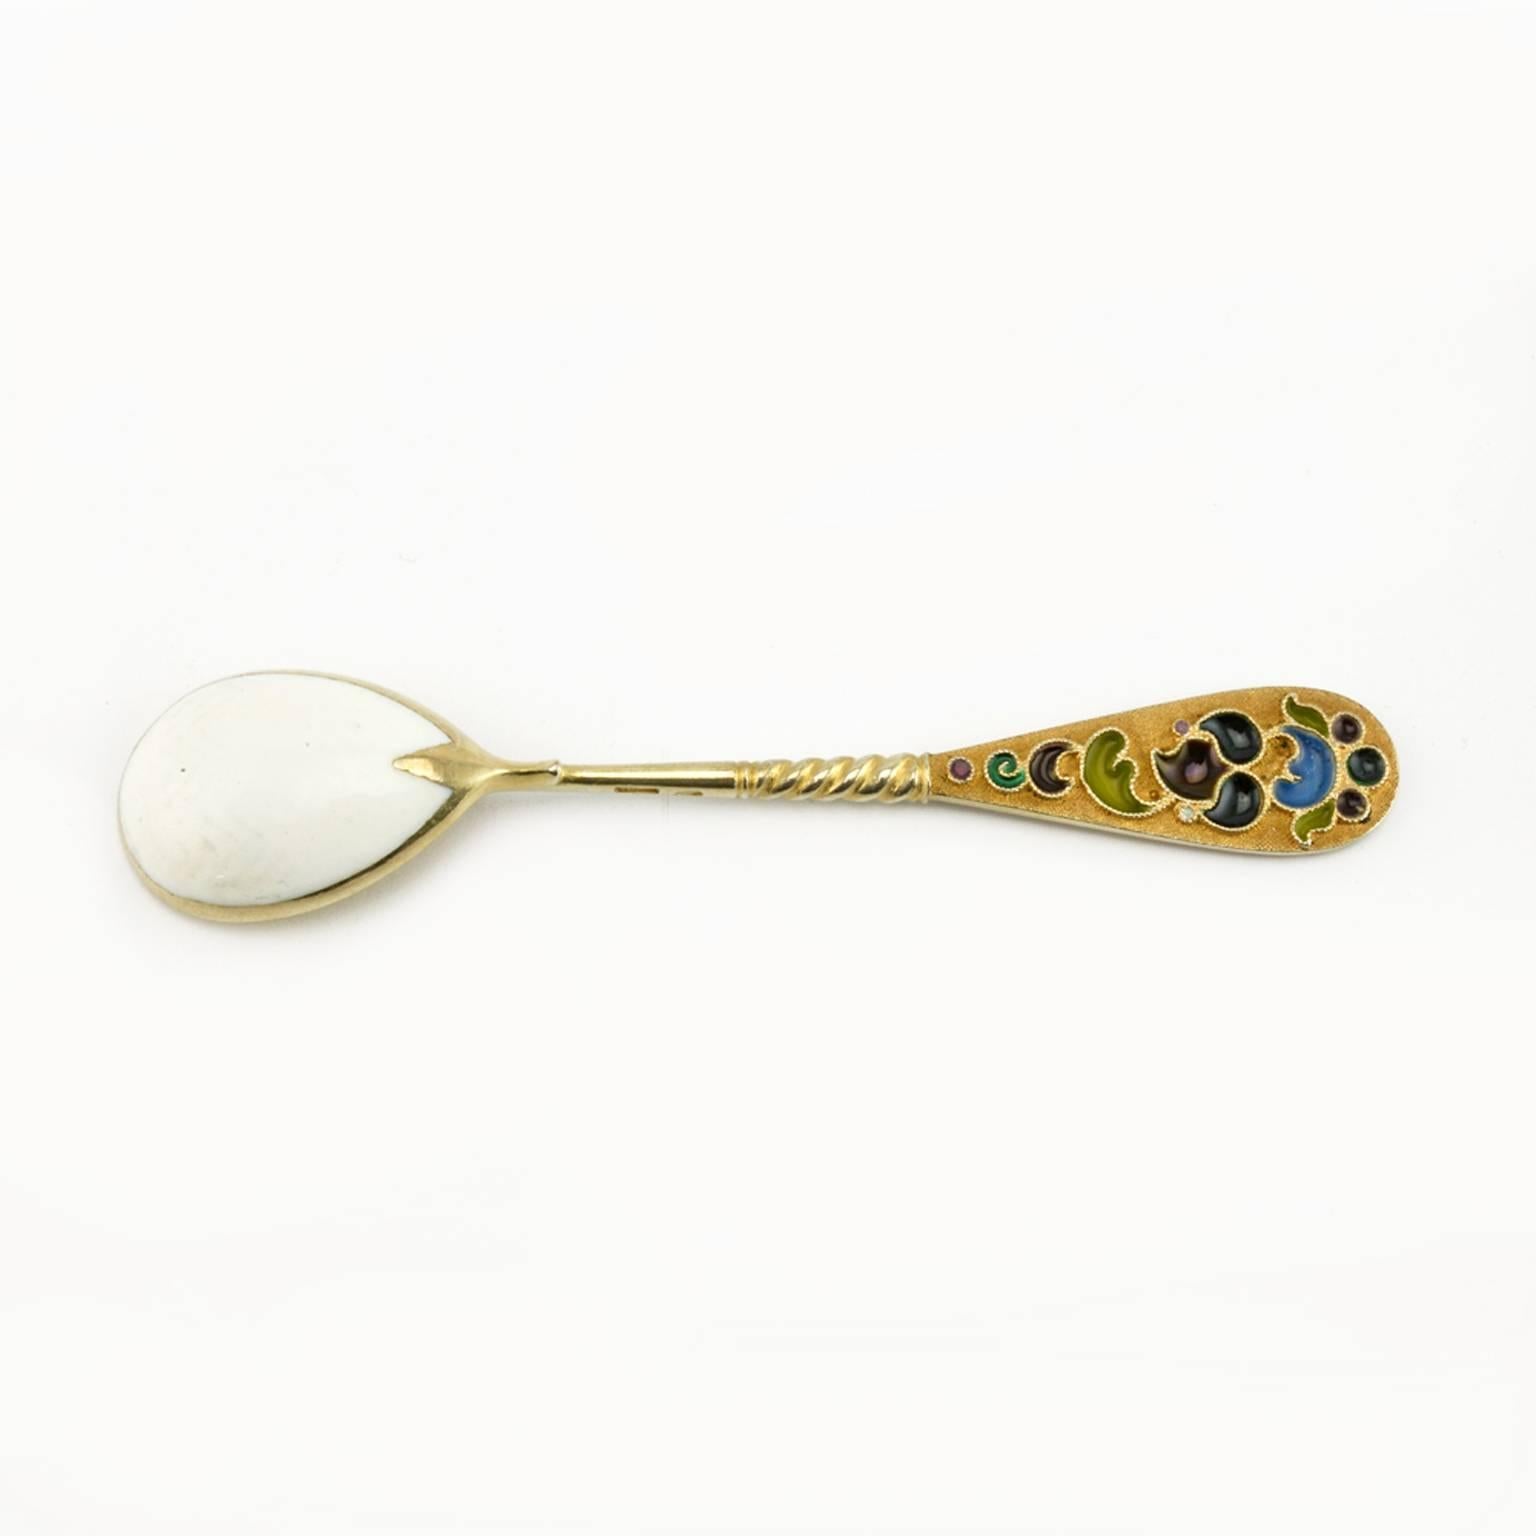 A set of twelve gilded silver and guilloché and plique-à-jour enamel demitasse spoons, 11th Artel, Moscow, 1908-1917, retailed by Tiffany & Co. The backs of the bowls enameled white over a herringbone, engine-turned ground, the interior of the bowls